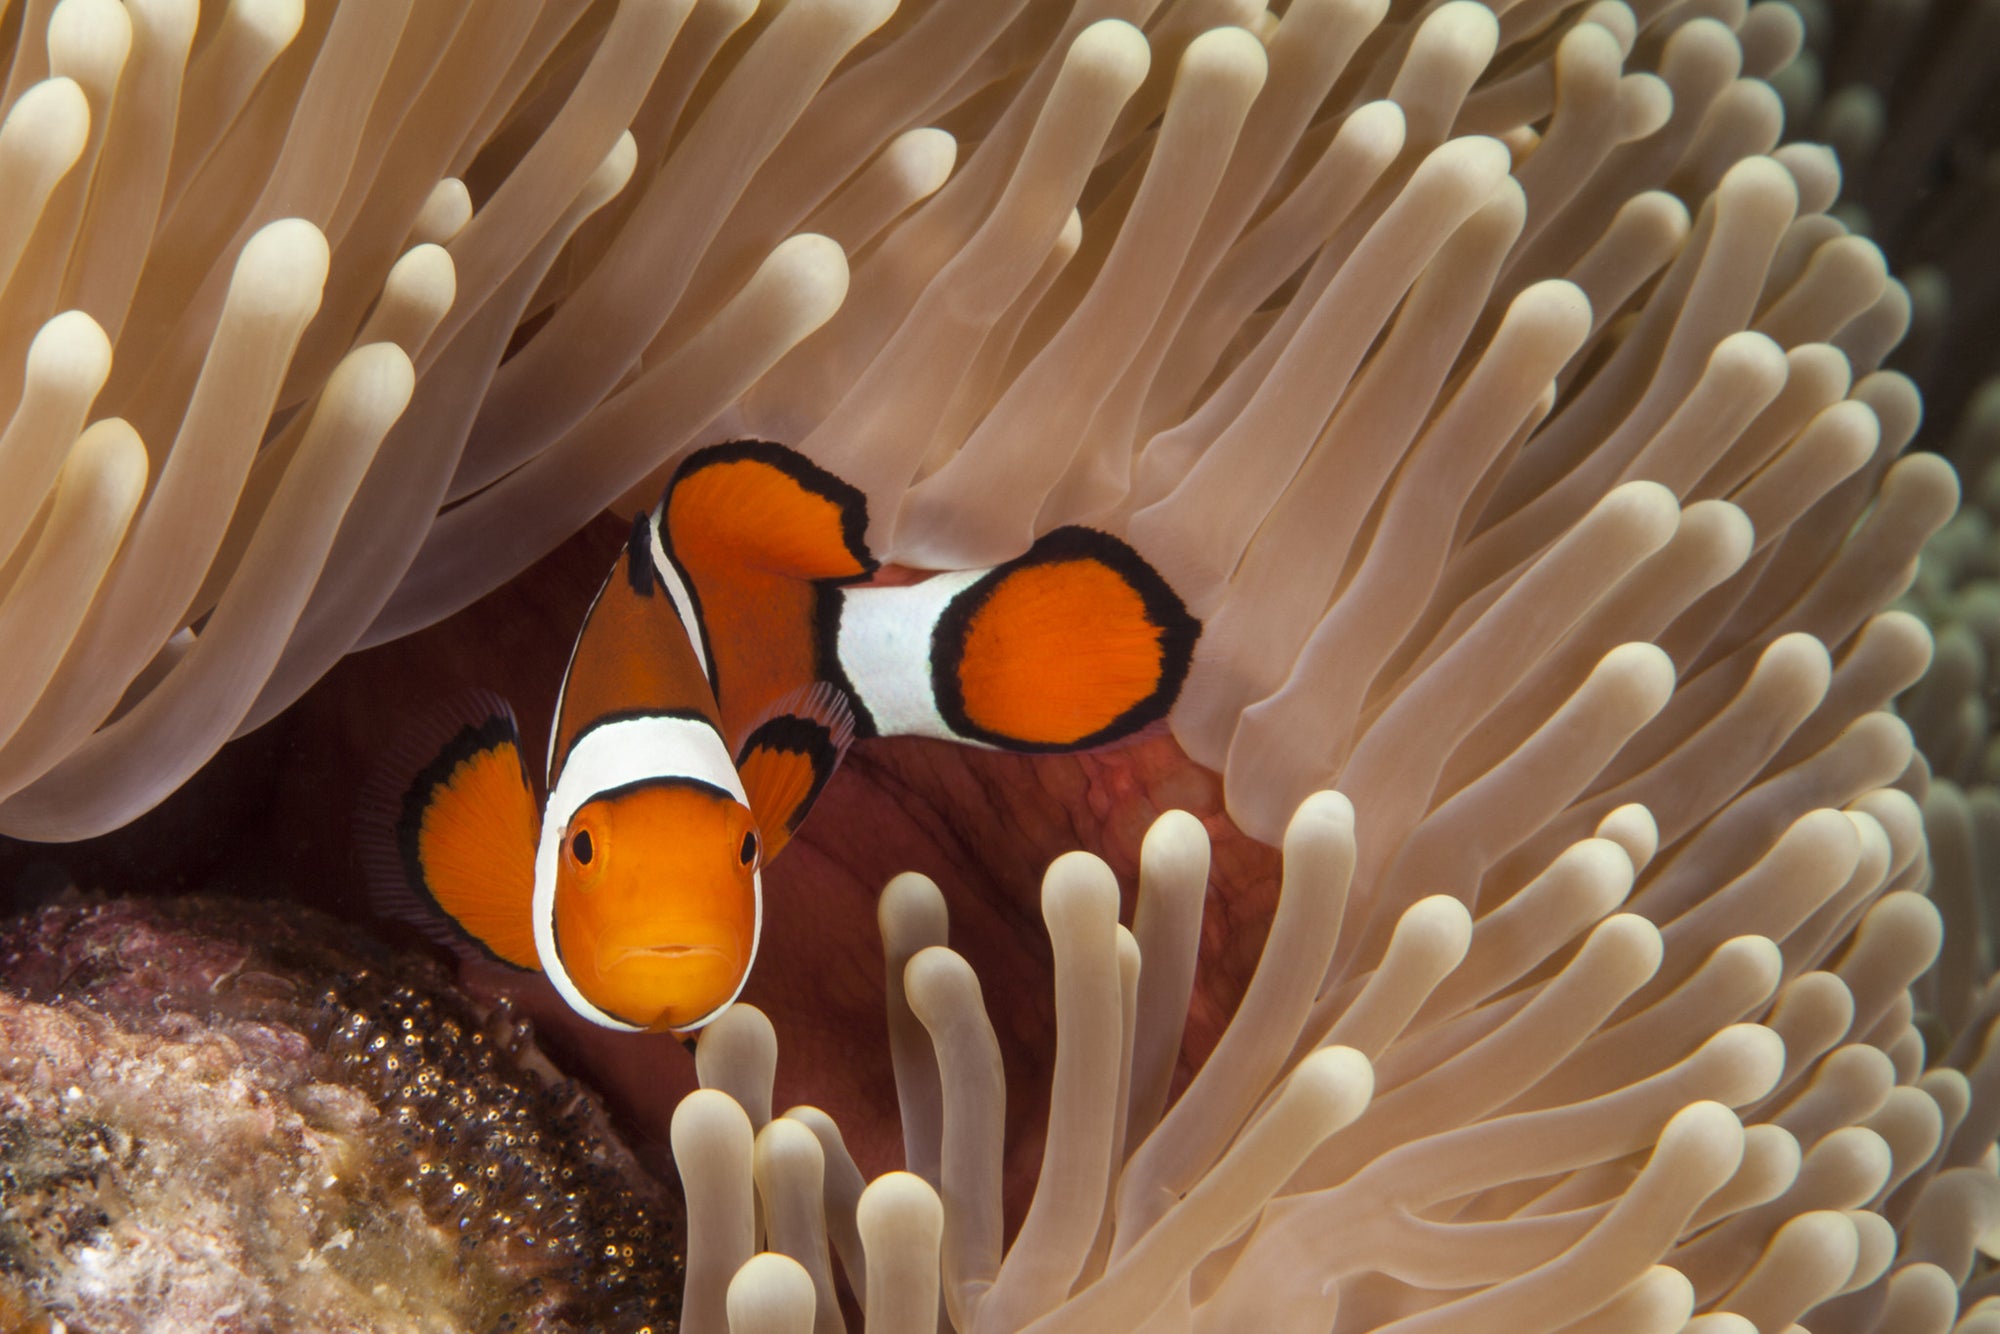 This male clown fish stands gaurd over his nest of babies on the Great Barrier Reef in Australia.